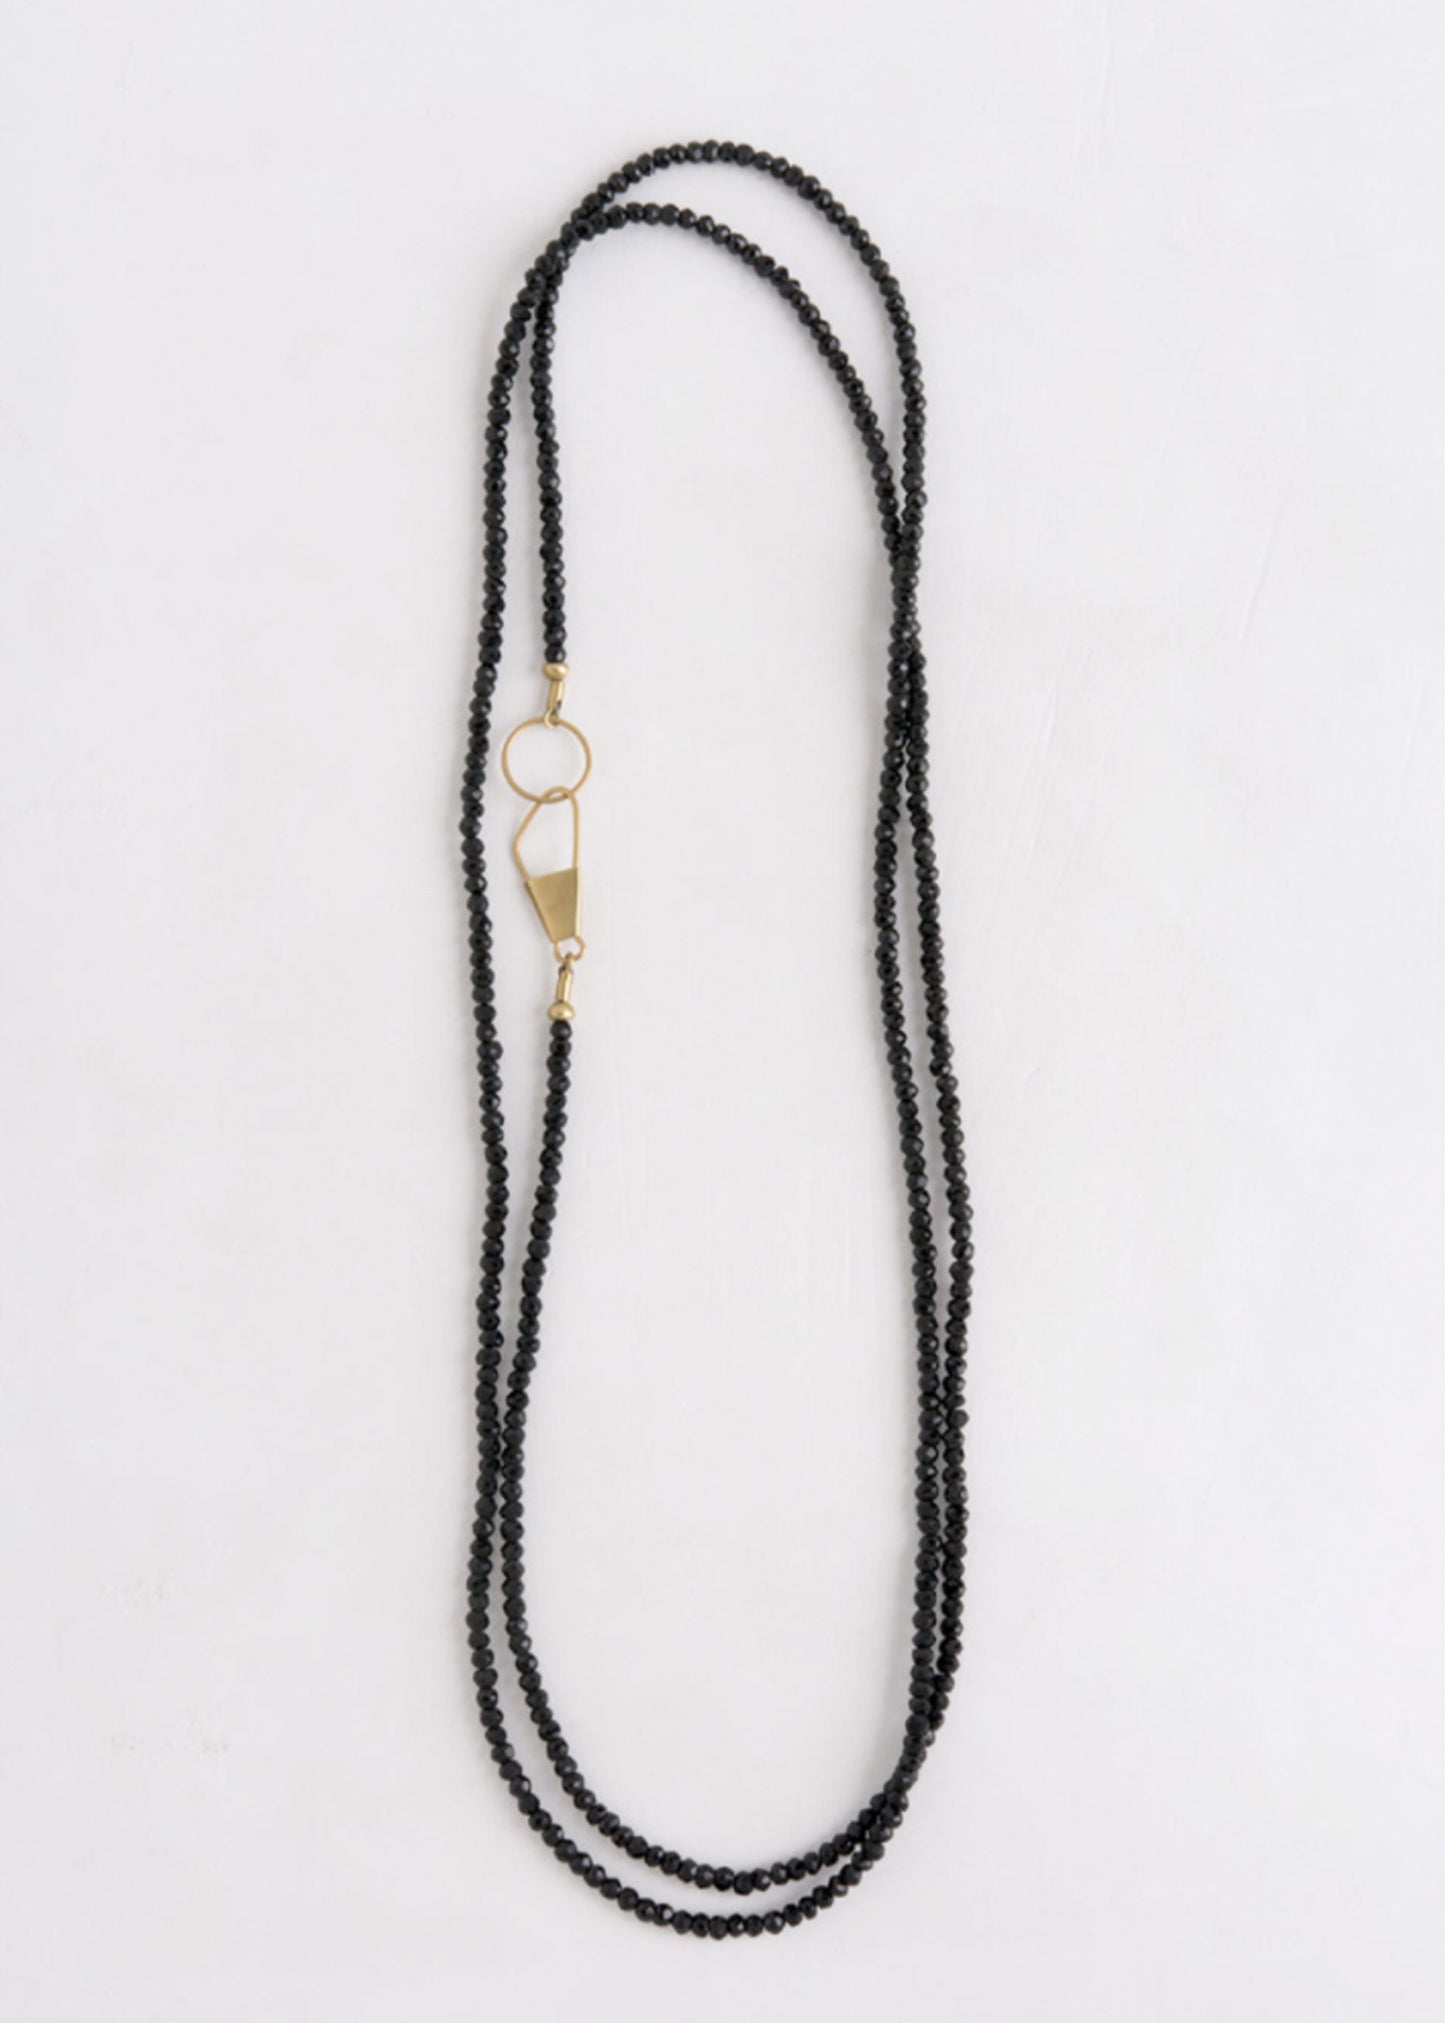 agas-tamar-necklace-ntn014 | Jewelry | Agas and Tamar